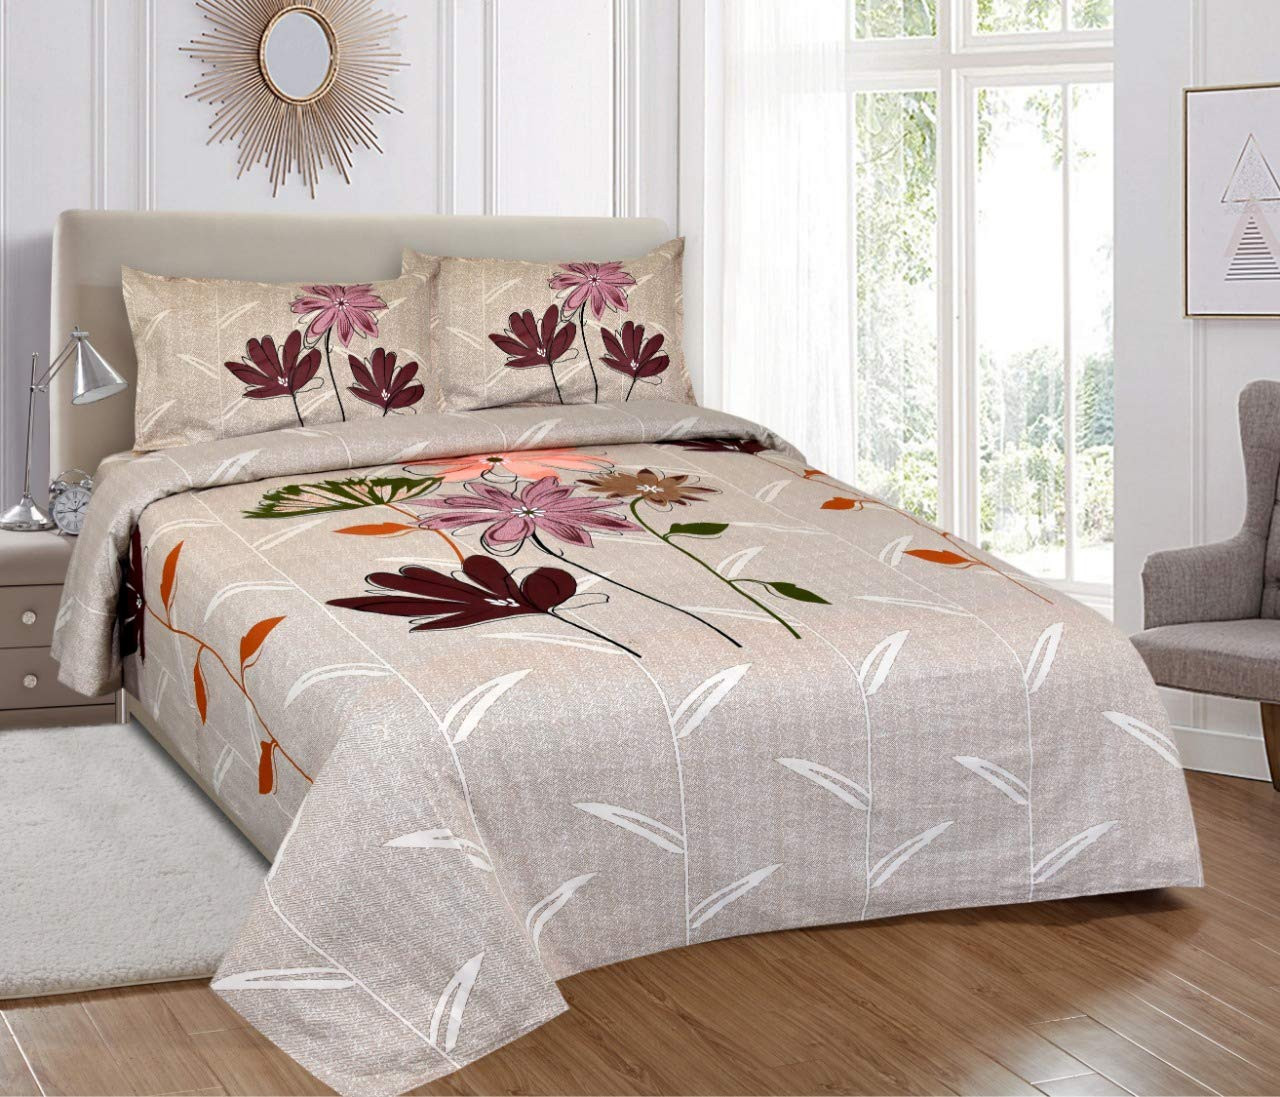 PURE COMFORT 100% Cotton King Size Bedsheet with 2 Pillow Covers